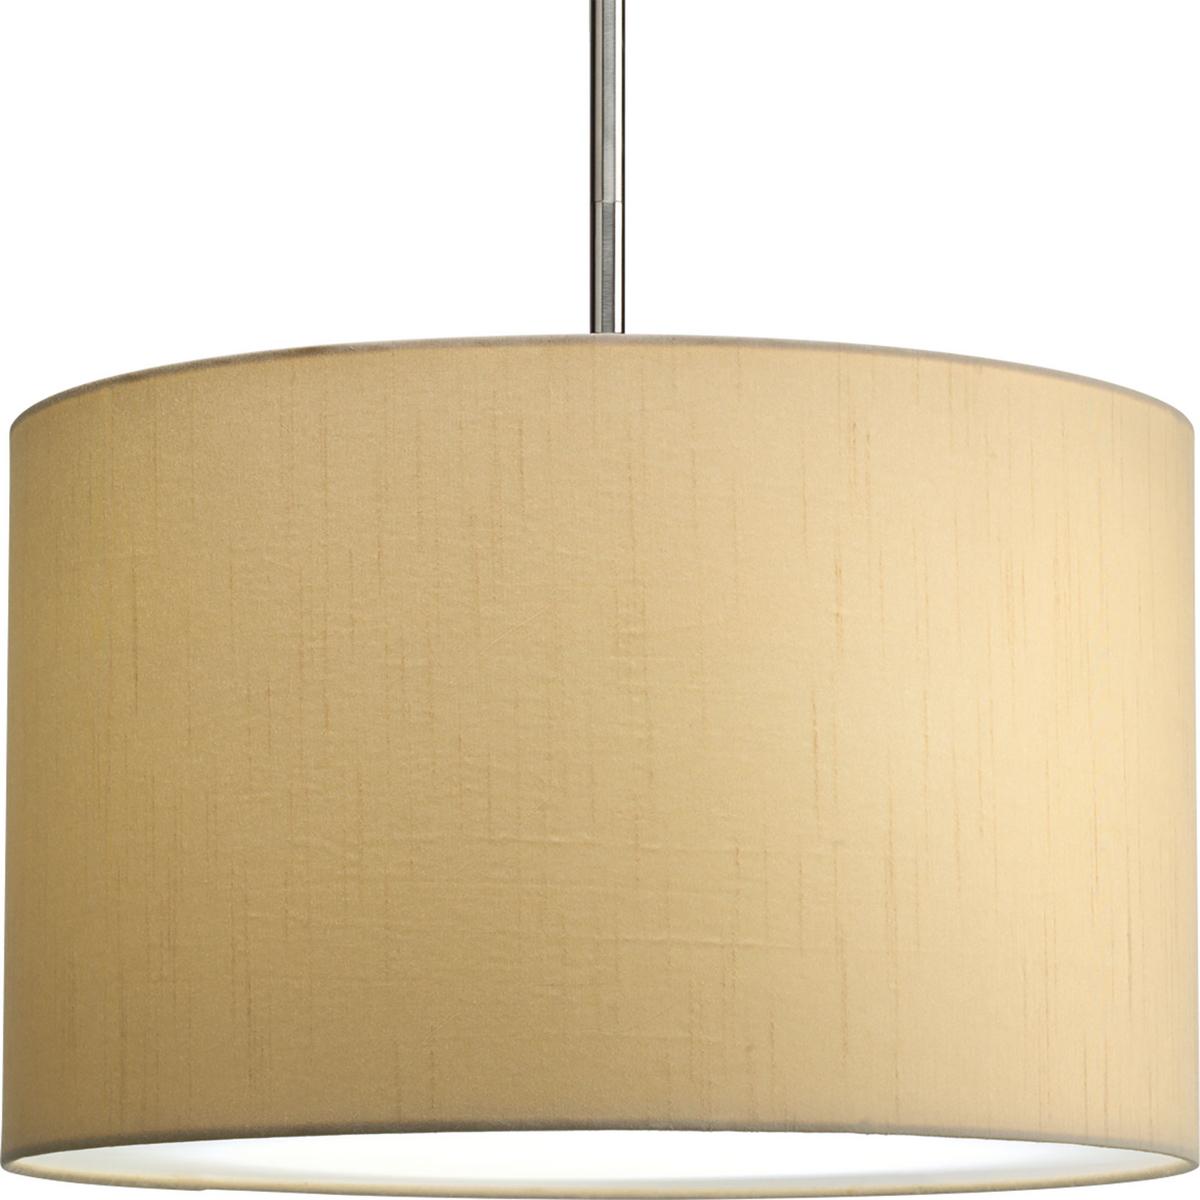 Hubbell P8823-01 The Markor Series is a modular pendant system. The versatile series allow the choice of shades and stem kits. This 16" shade with Beige Silken fabric is inspired by mid-century design. Acrylic bottom diffuser. This shade can be used with a variety of stem